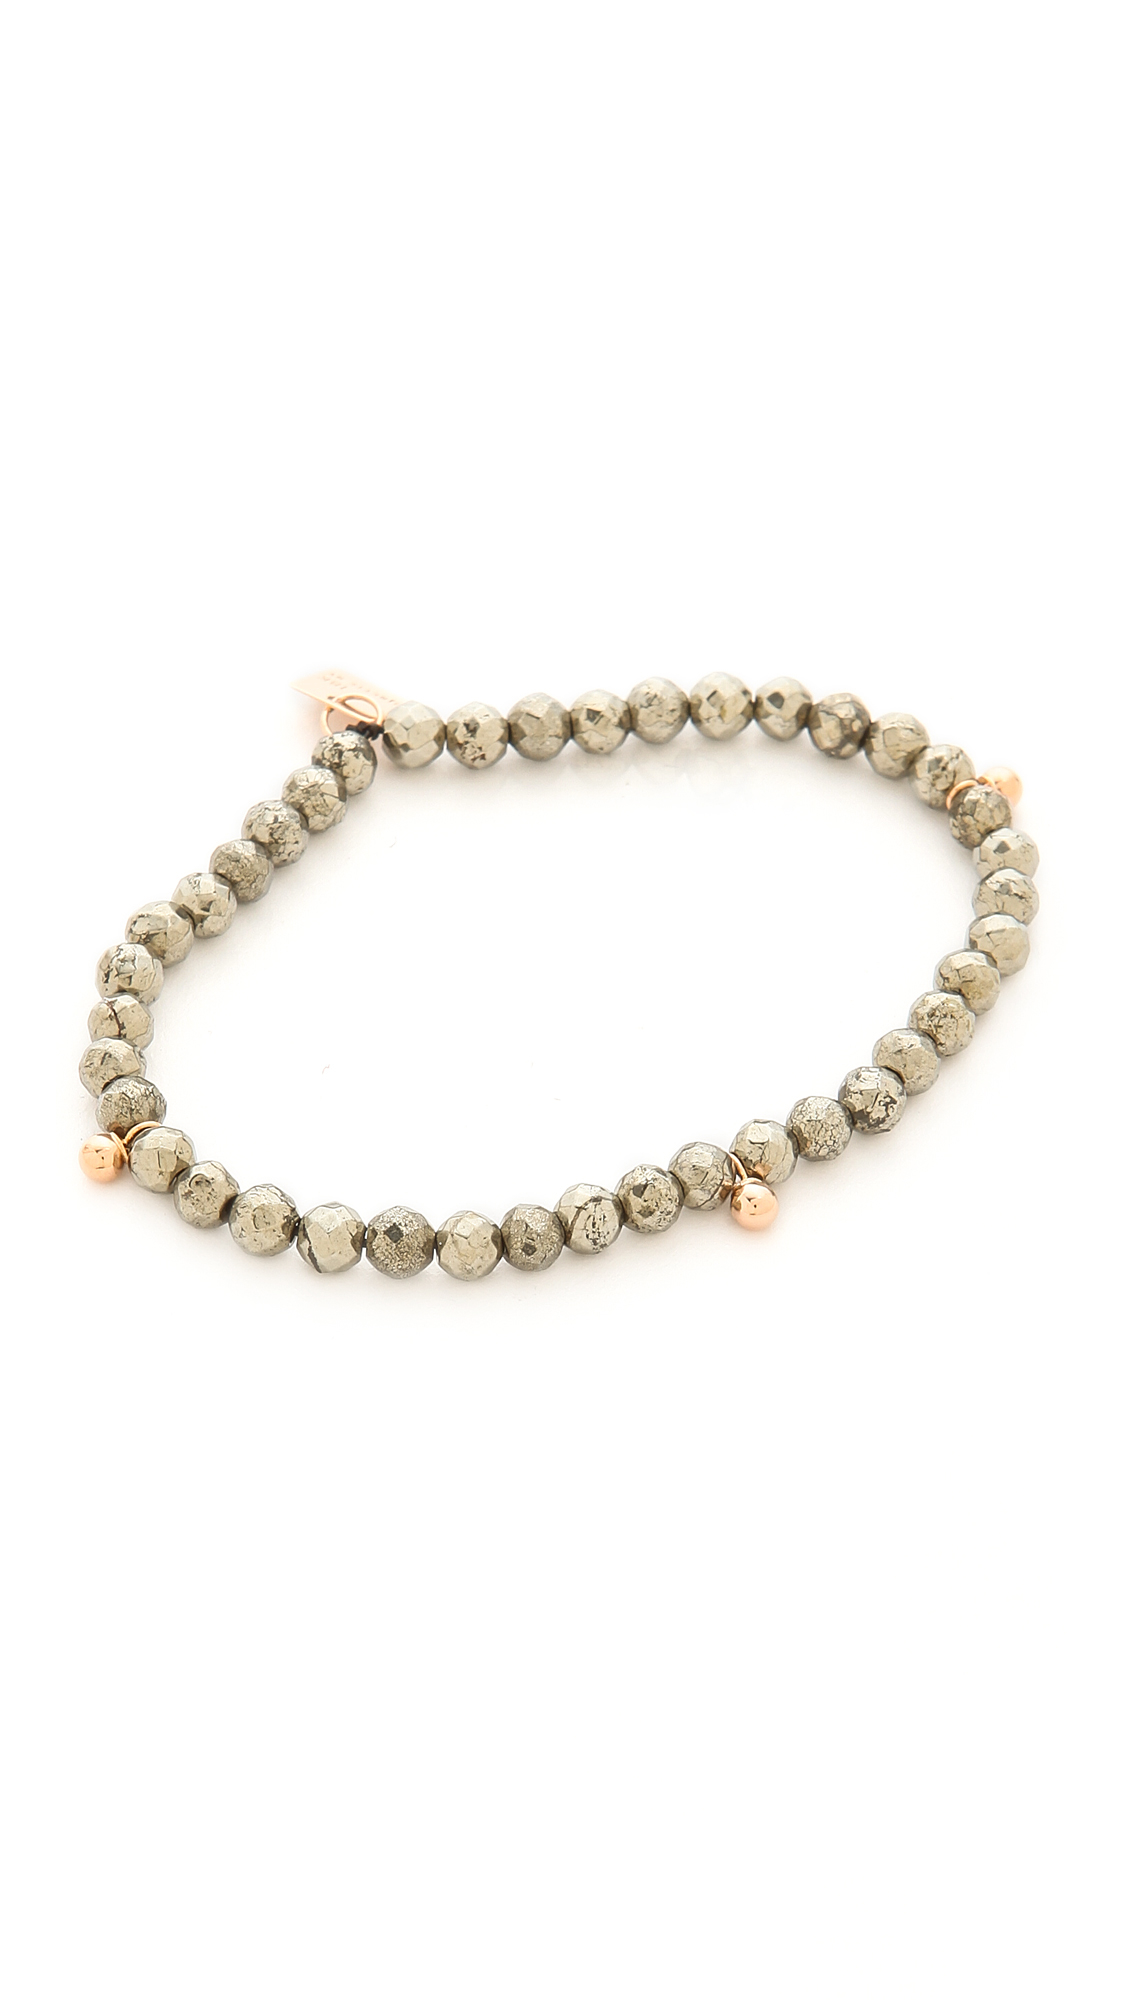 Lyst - Ginette Ny Fool's Gold Faceted Bracelet in Pink